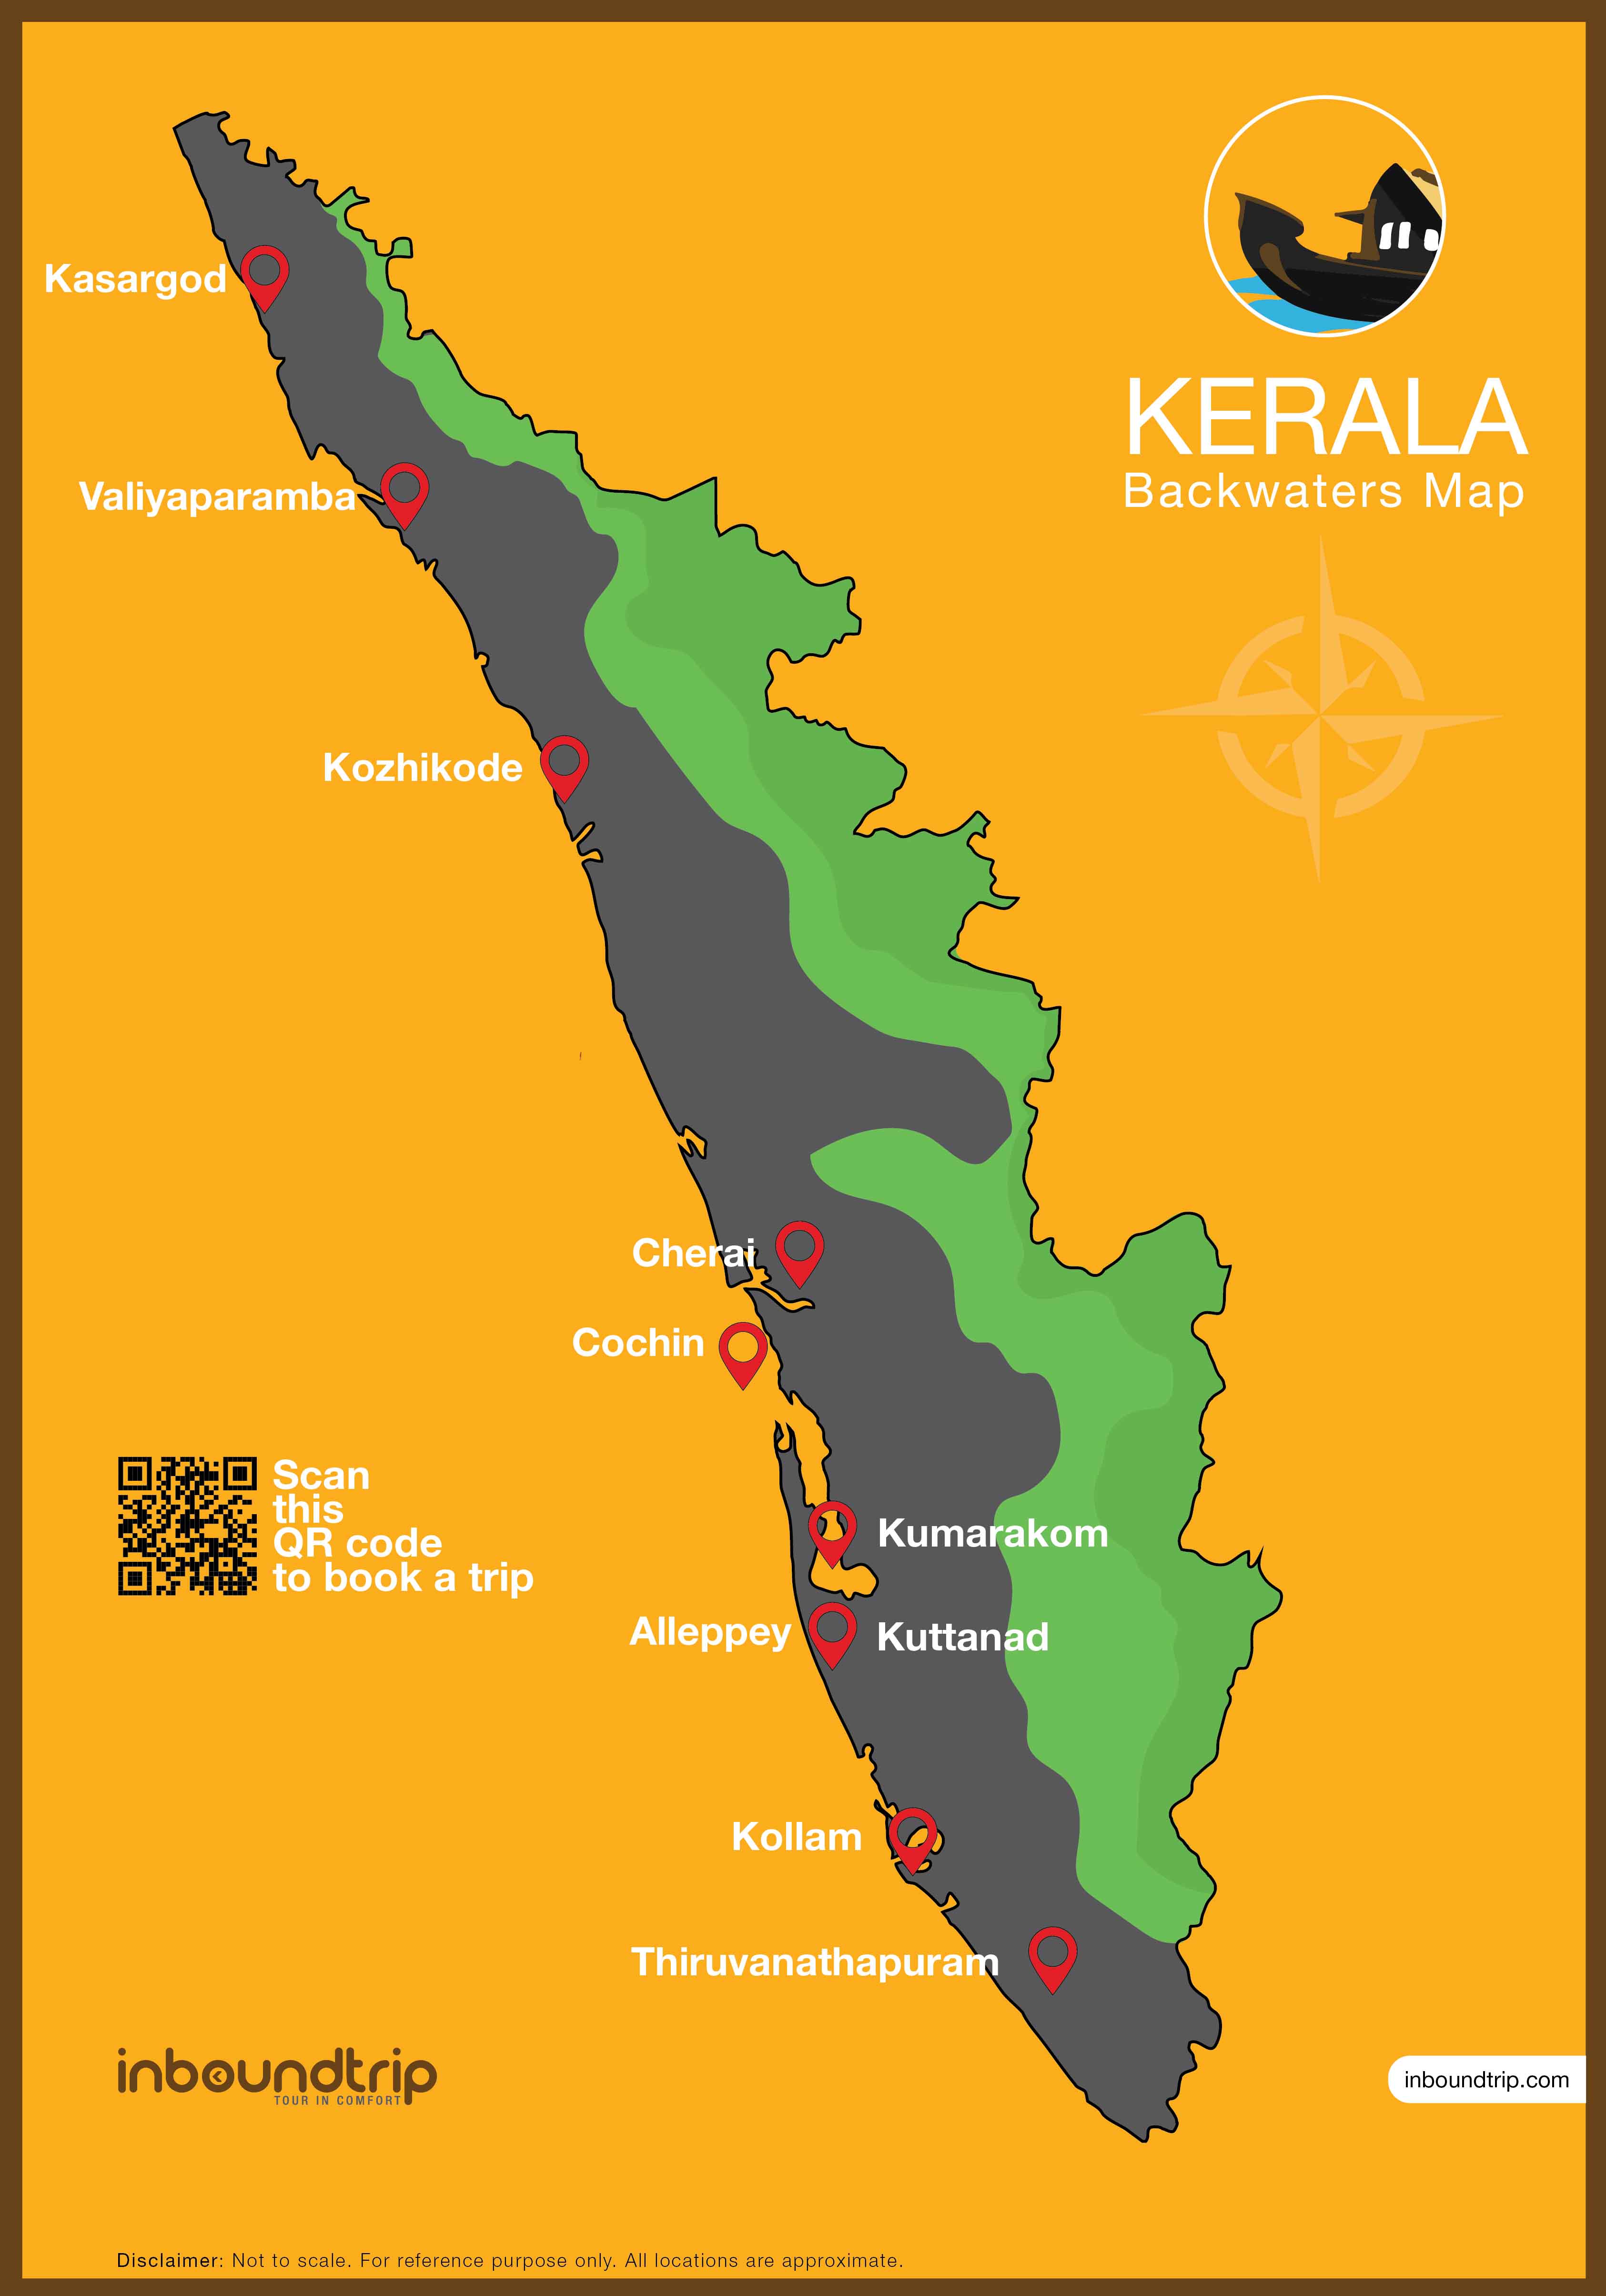 Kerala Backwaters Map - Kerala Taxi Tours - Travel experiences, guides and tips